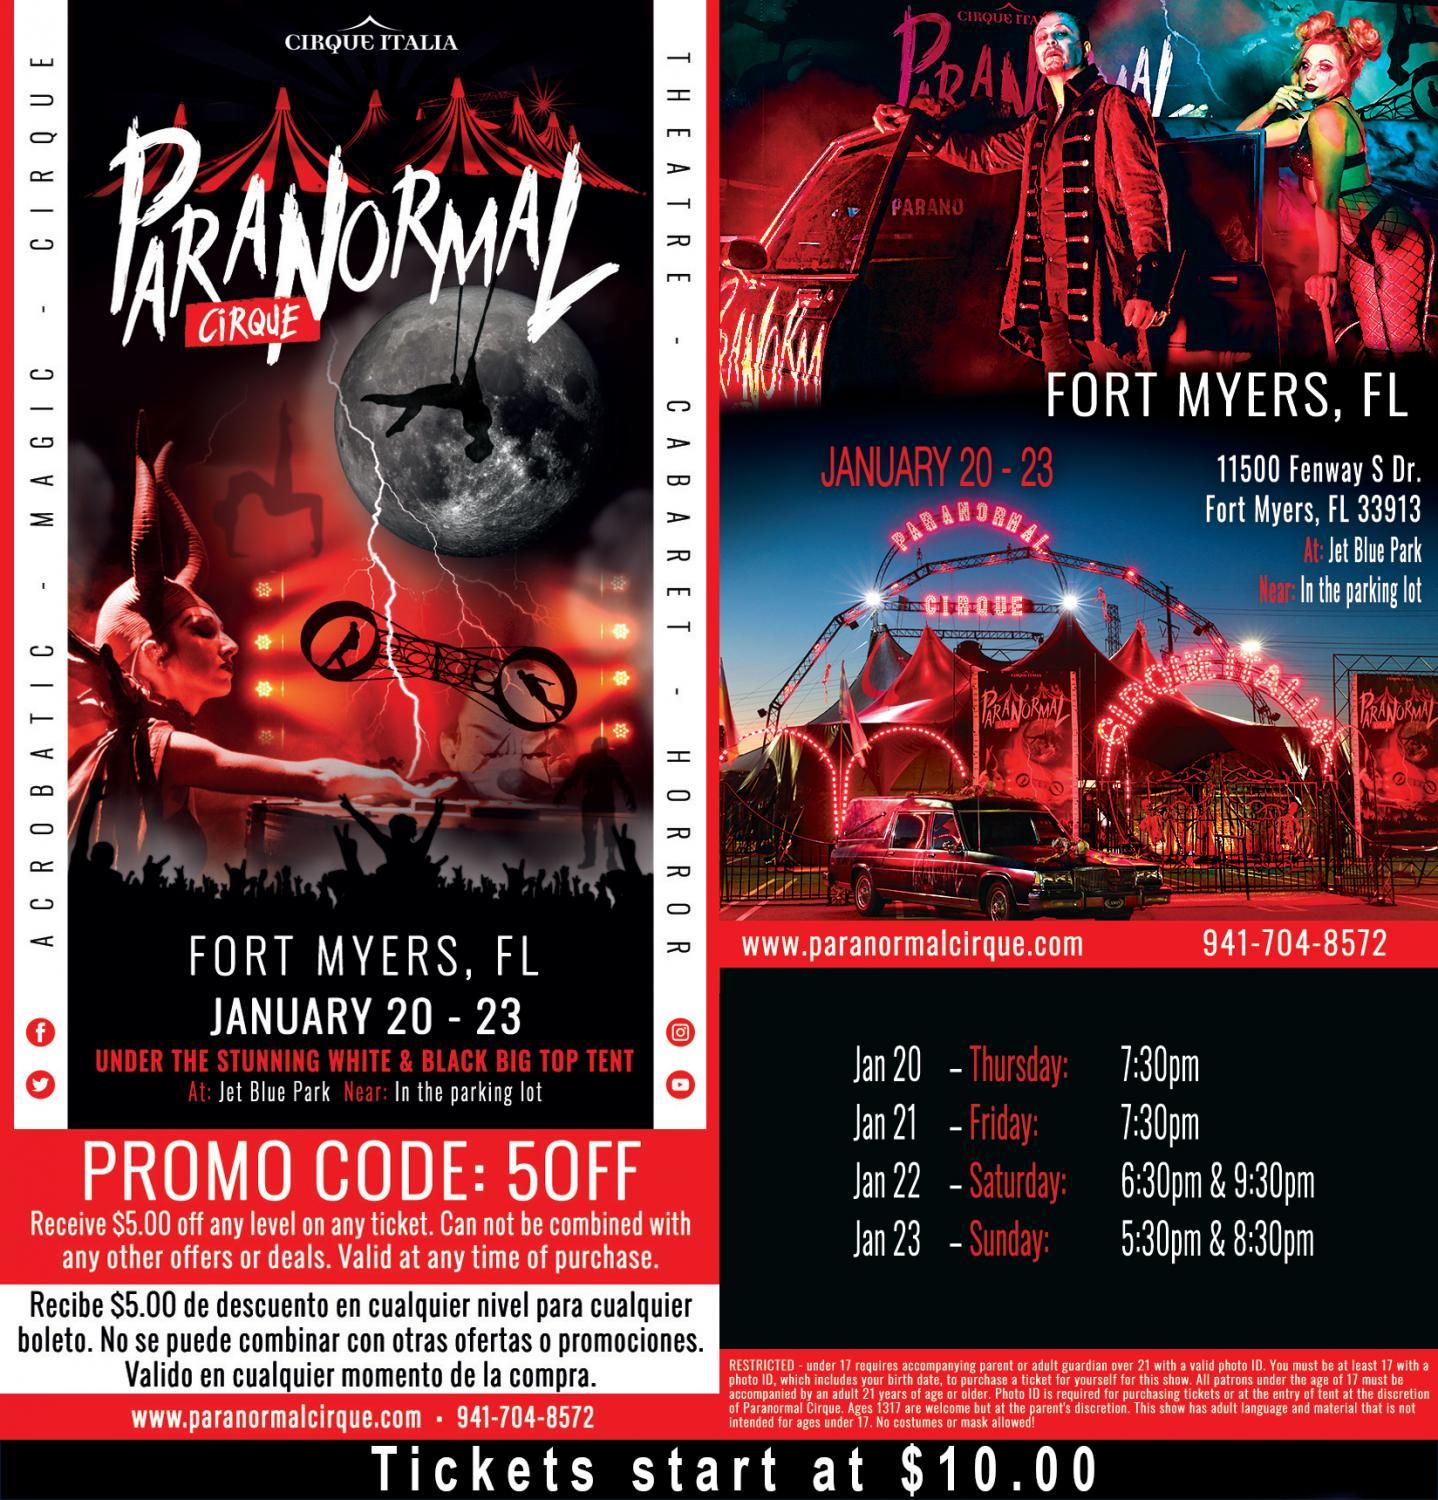 Paranormal Cirque Fort Myers, FL